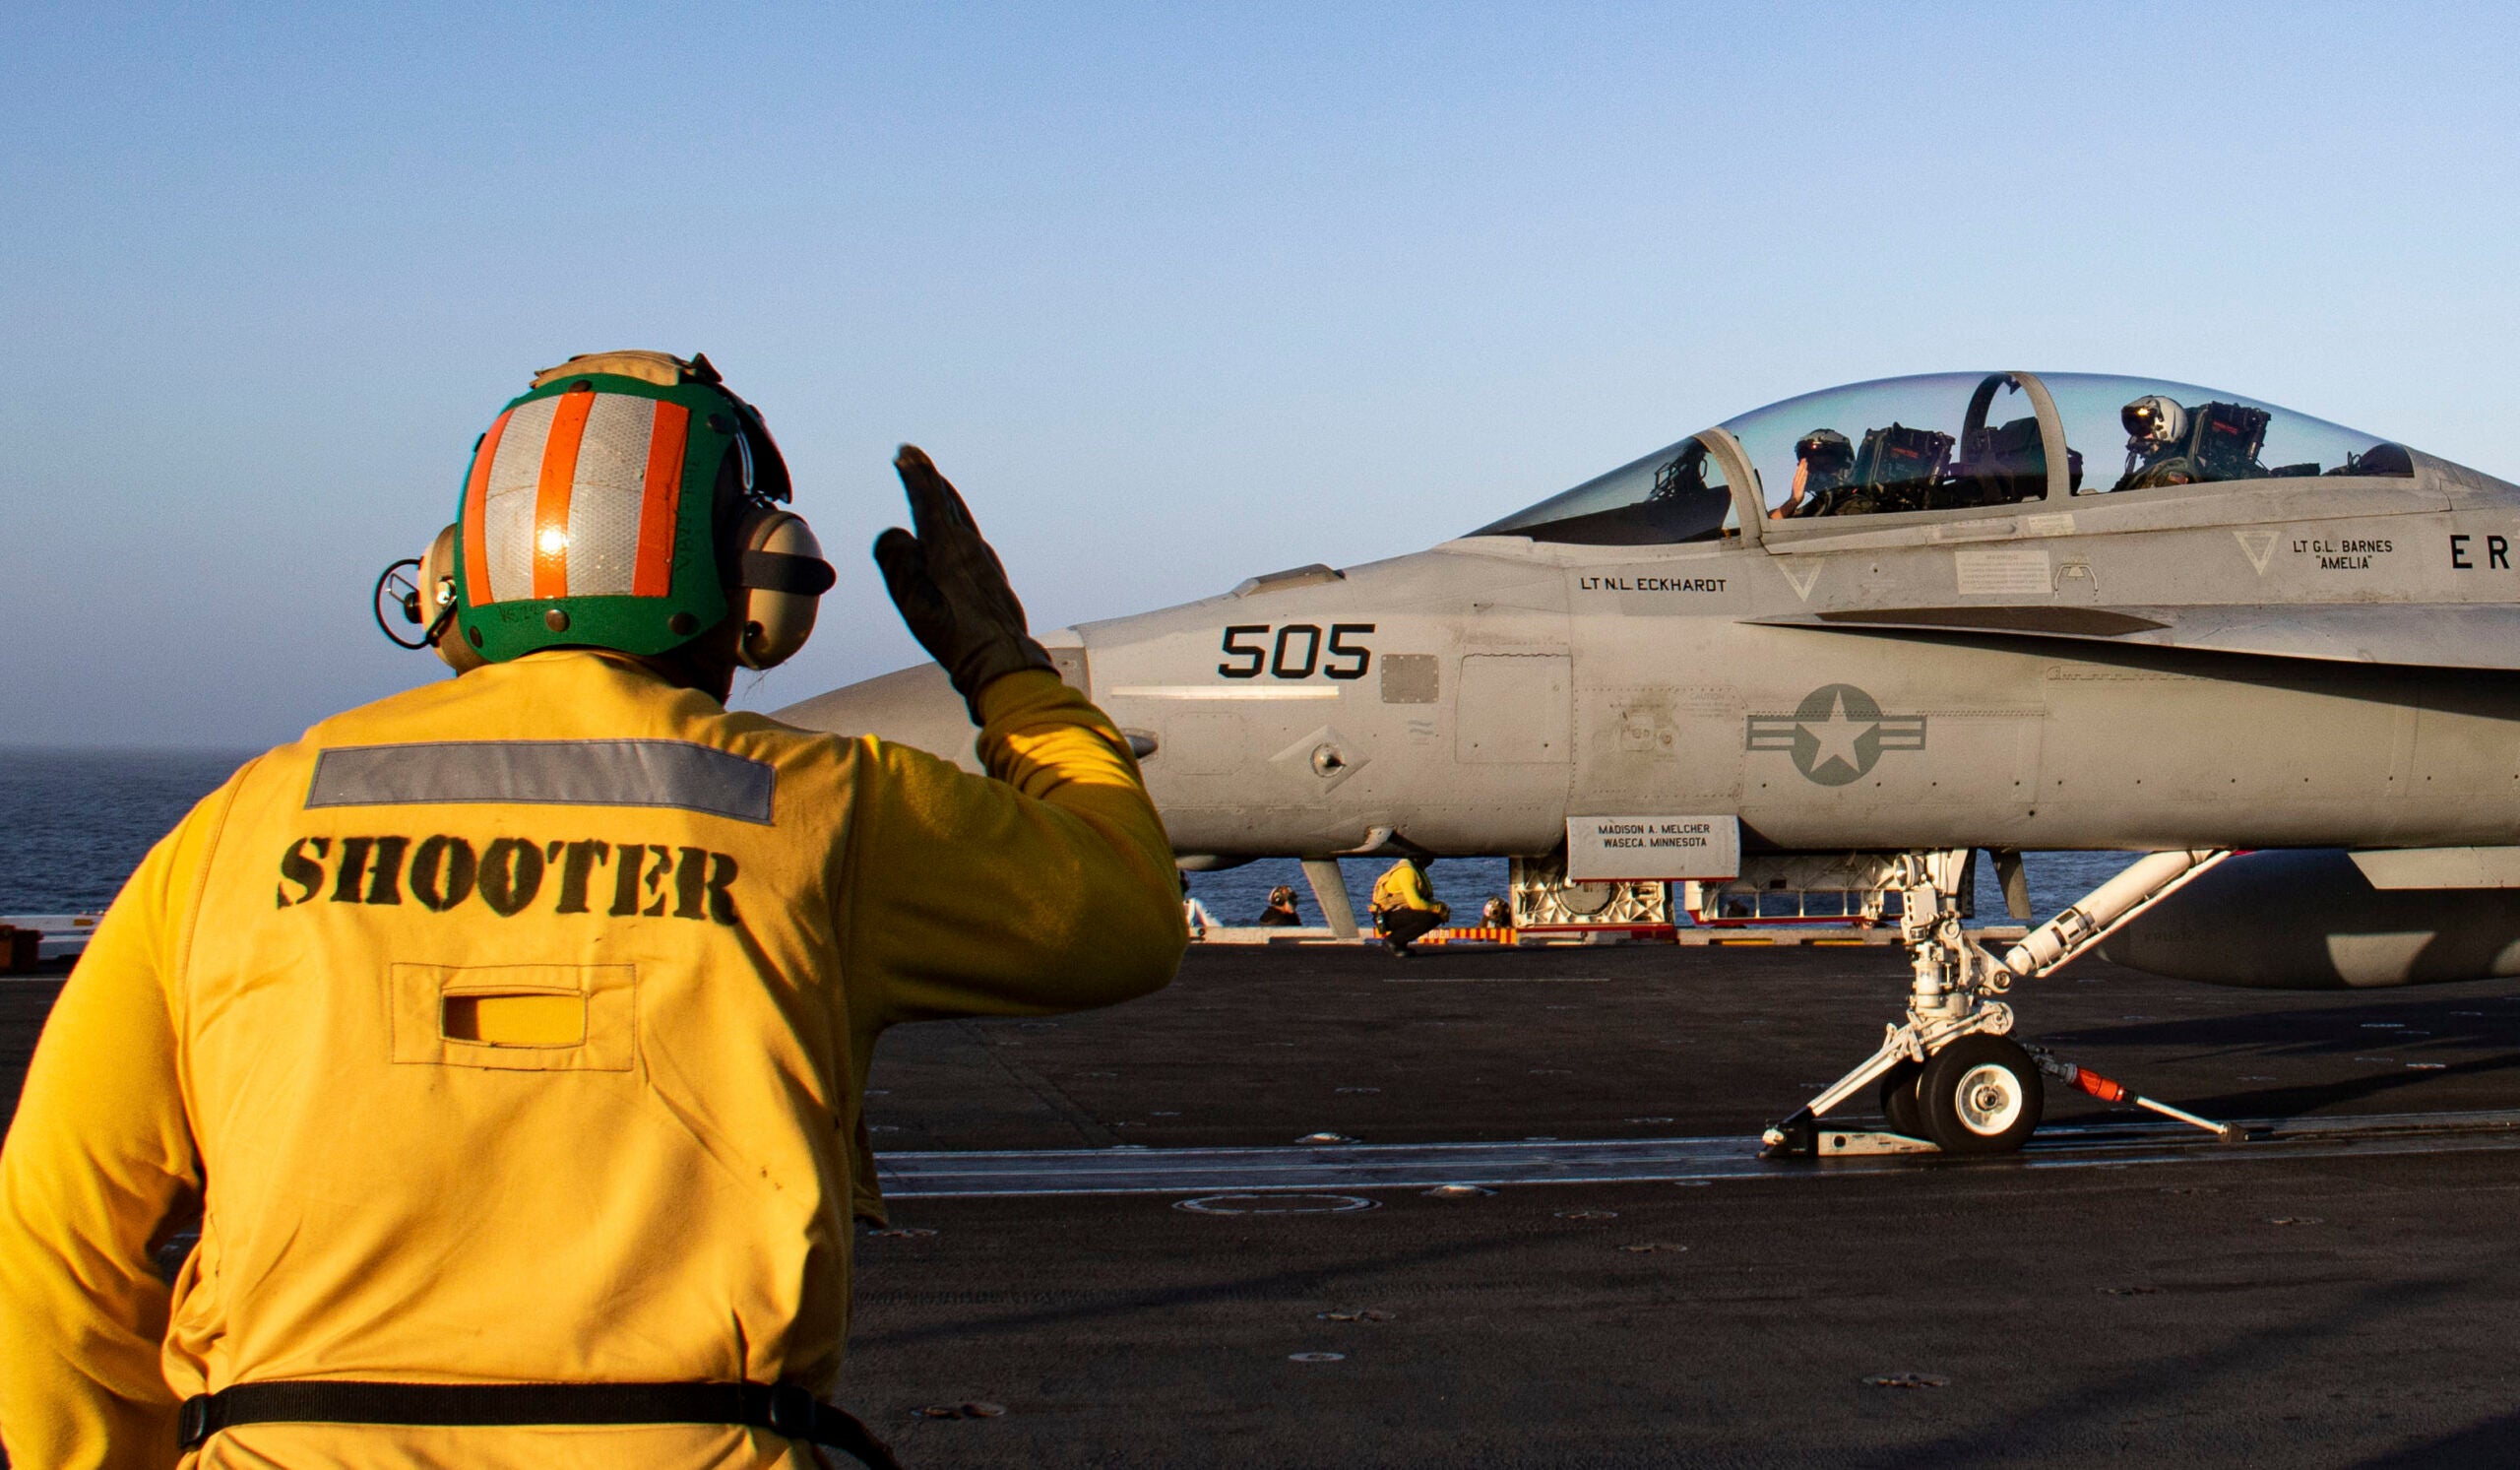 220614-N-MJ302-1170 PACIFIC OCEAN (June 14, 2022) A Shooter salutes the pilot of an E/A-18G Growler, from the “Cougars” of Electronic Attack Squadron (VAQ) 139, on the flight deck of the aircraft carrier USS Nimitz (CVN 68). Nimitz is underway in the U.S. 3rd Fleet area of operations. (U.S. Navy photo by Mass Communication Specialist 3rd Class David Rowe)